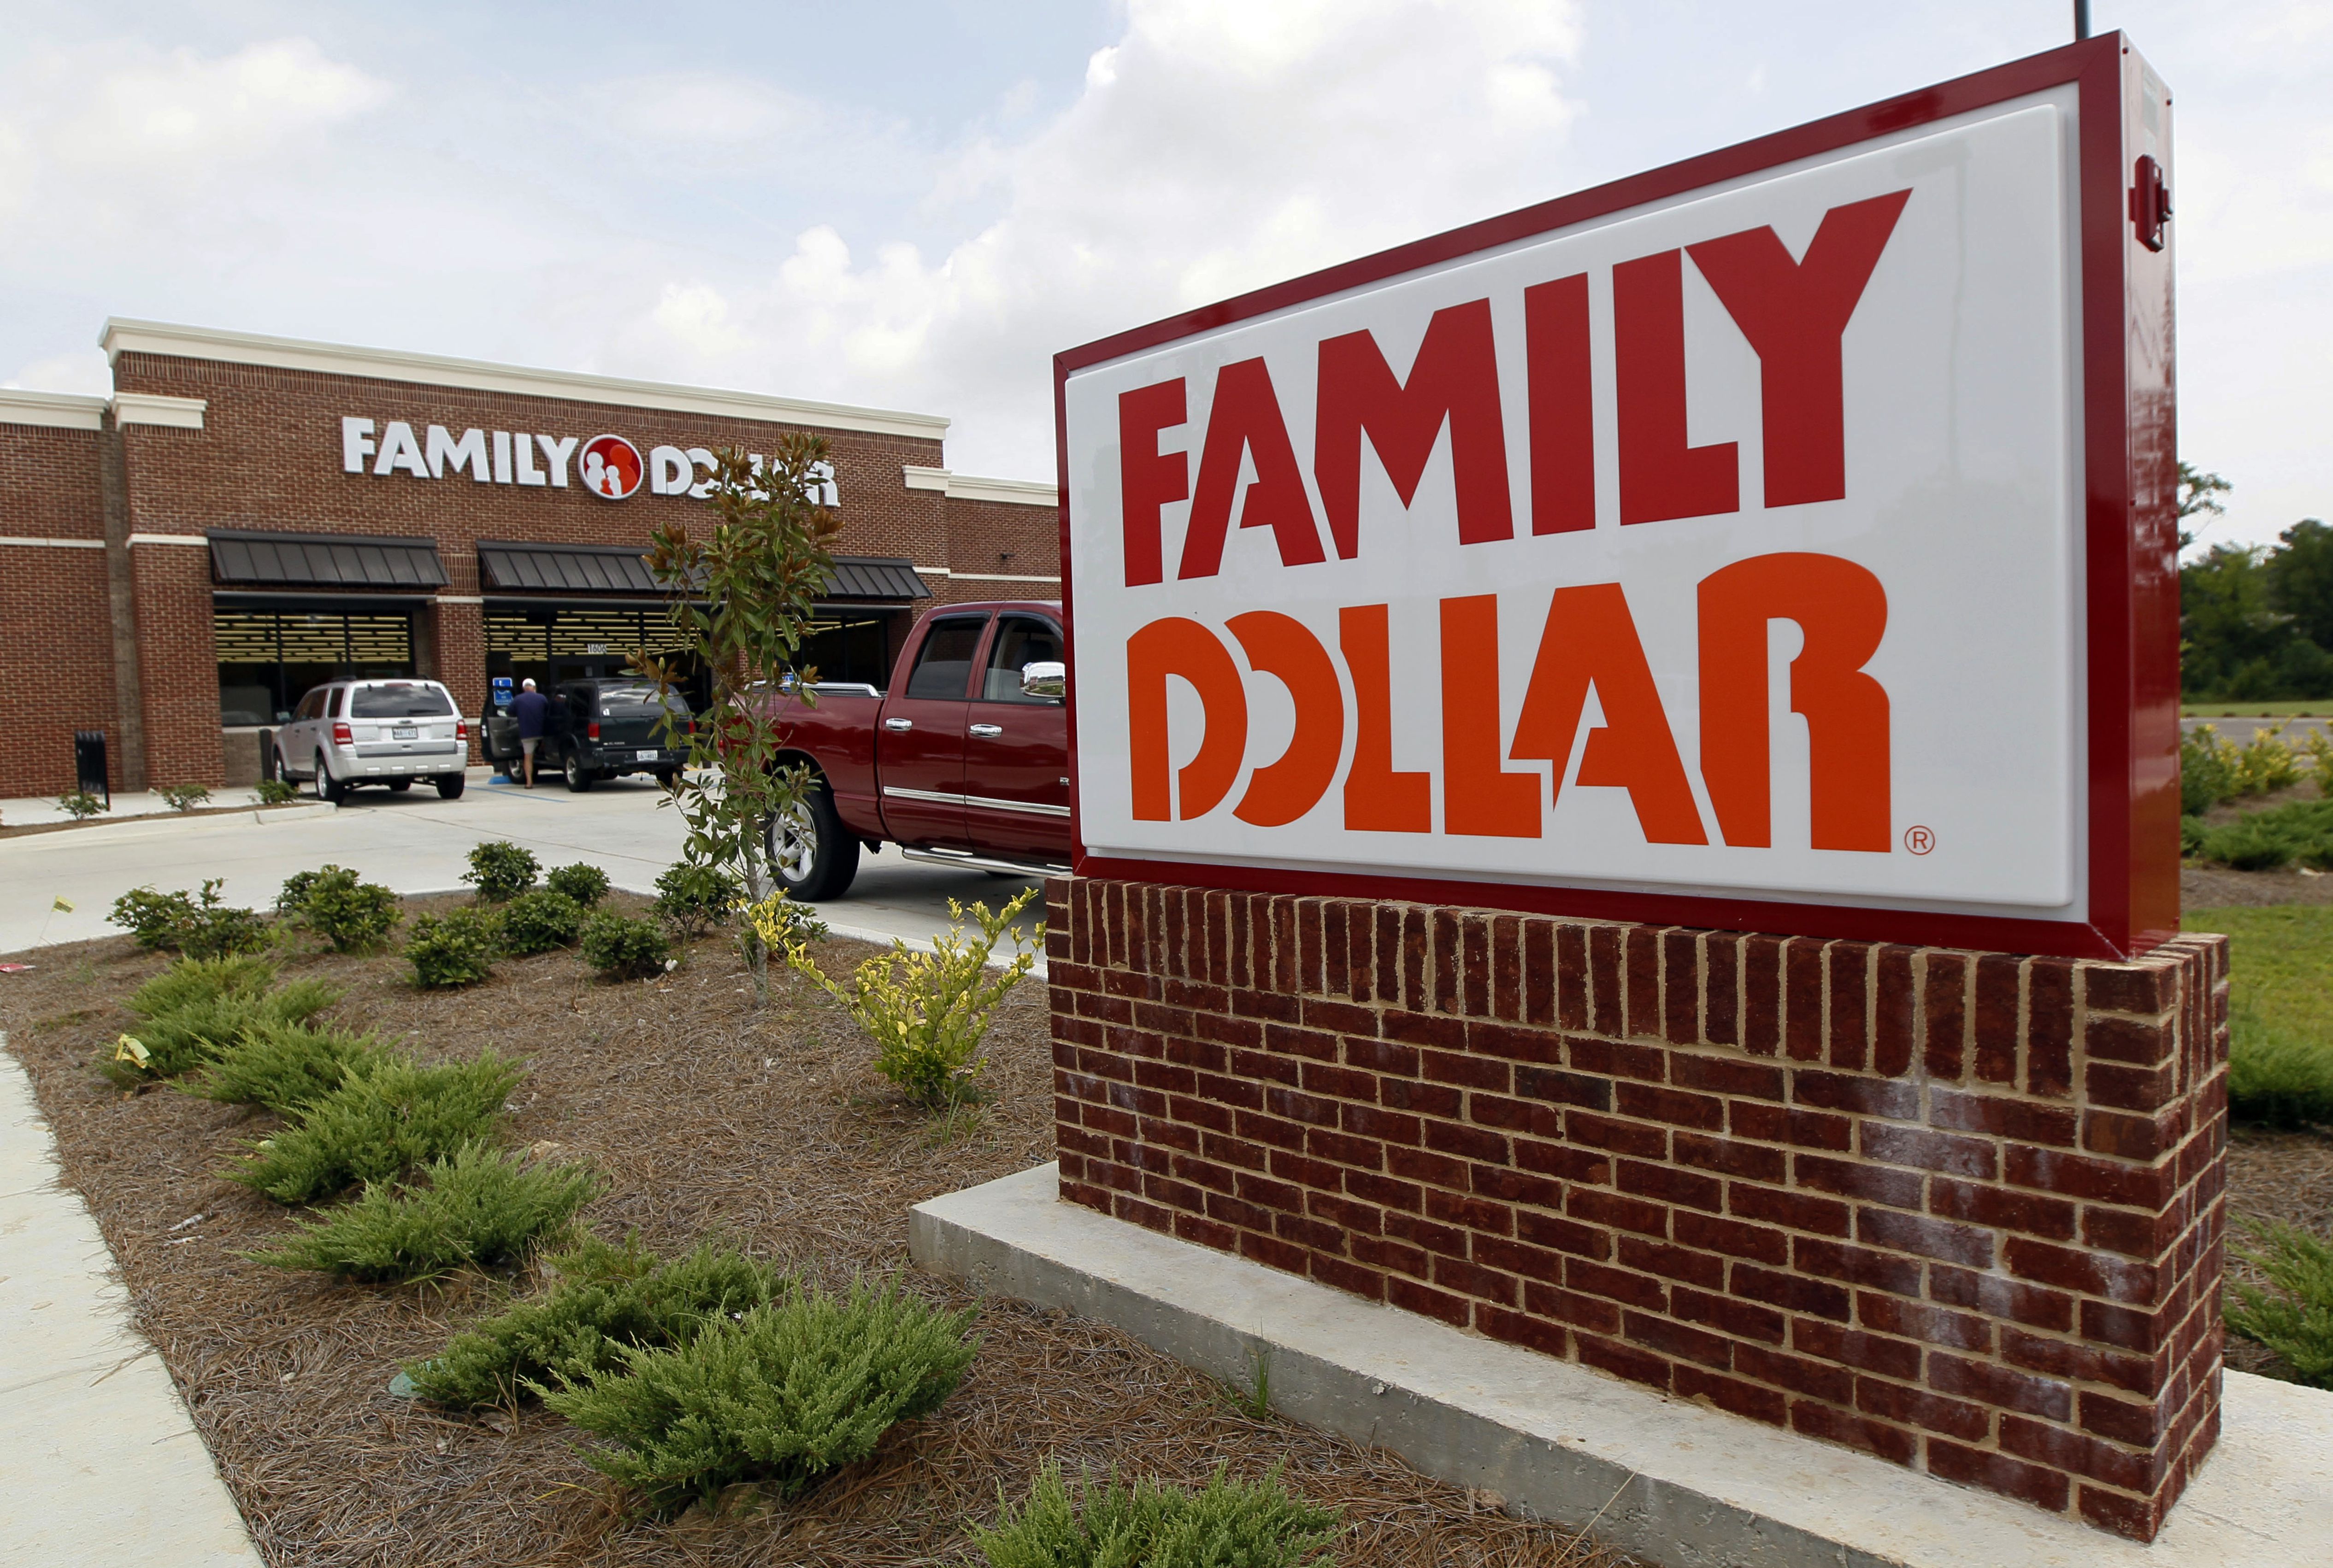 143 Family Dollar Stores Including 5 In Alabama Closing